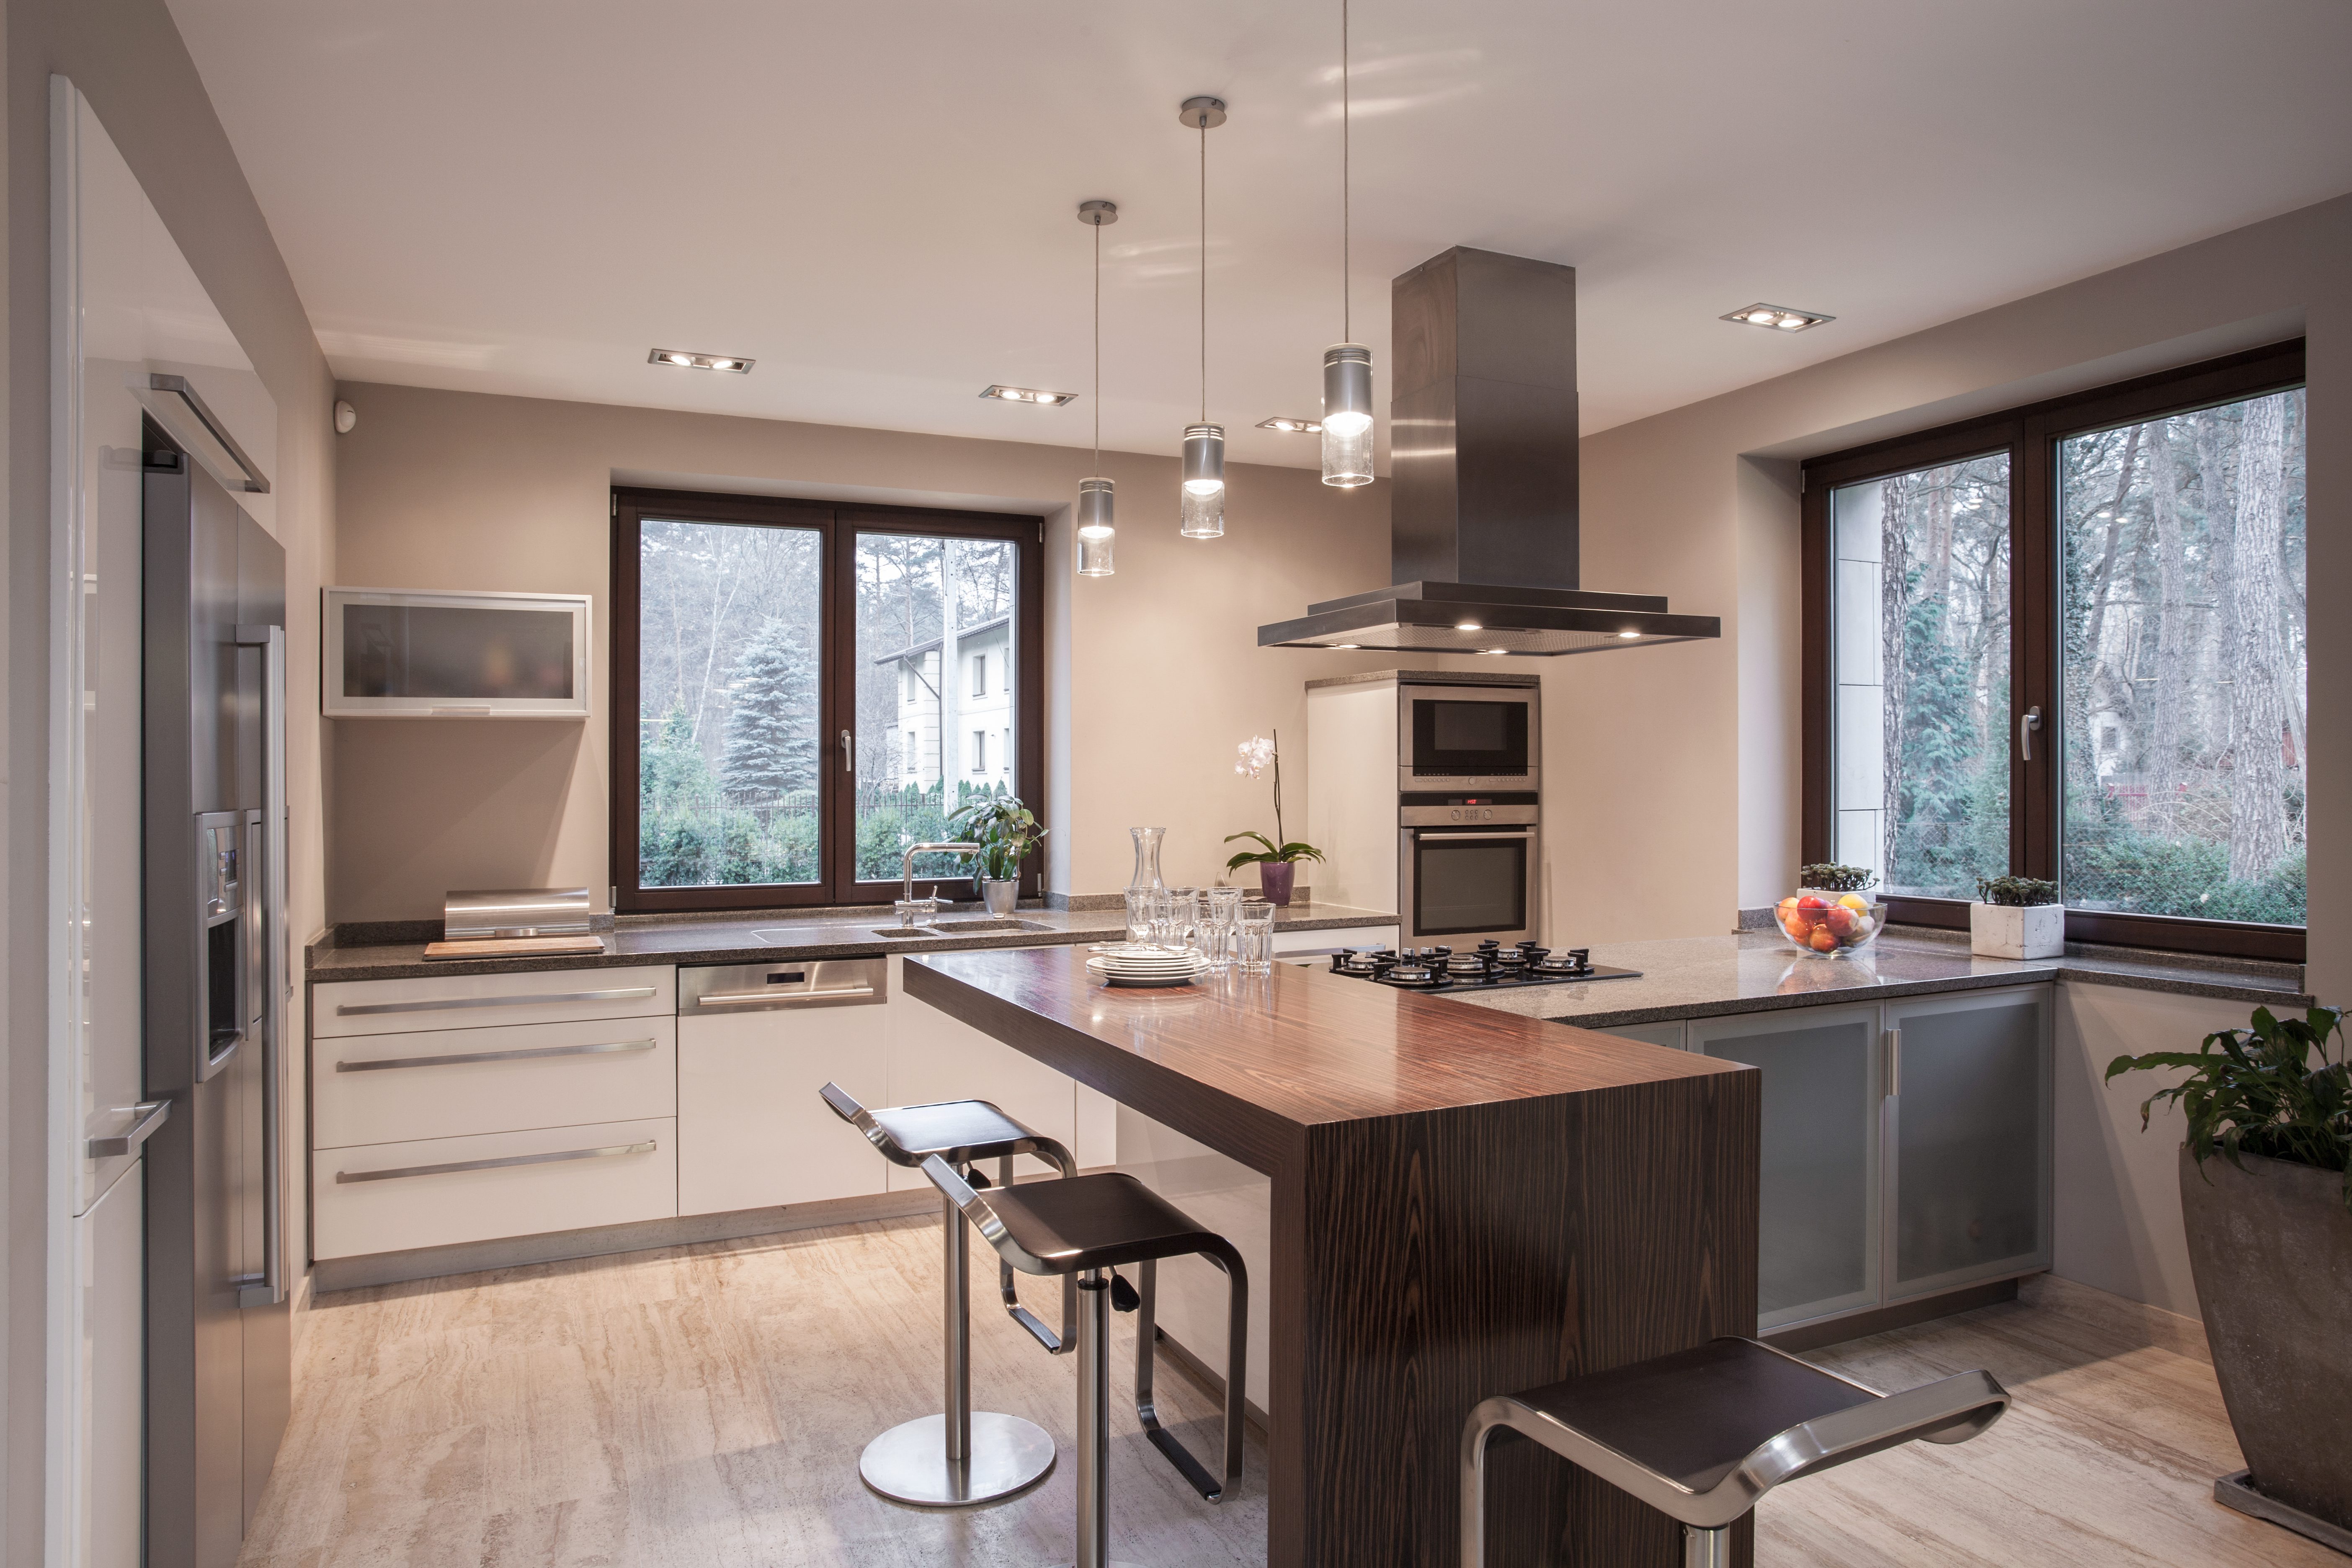 What You Should Consider When Remodeling Your Kitchen	